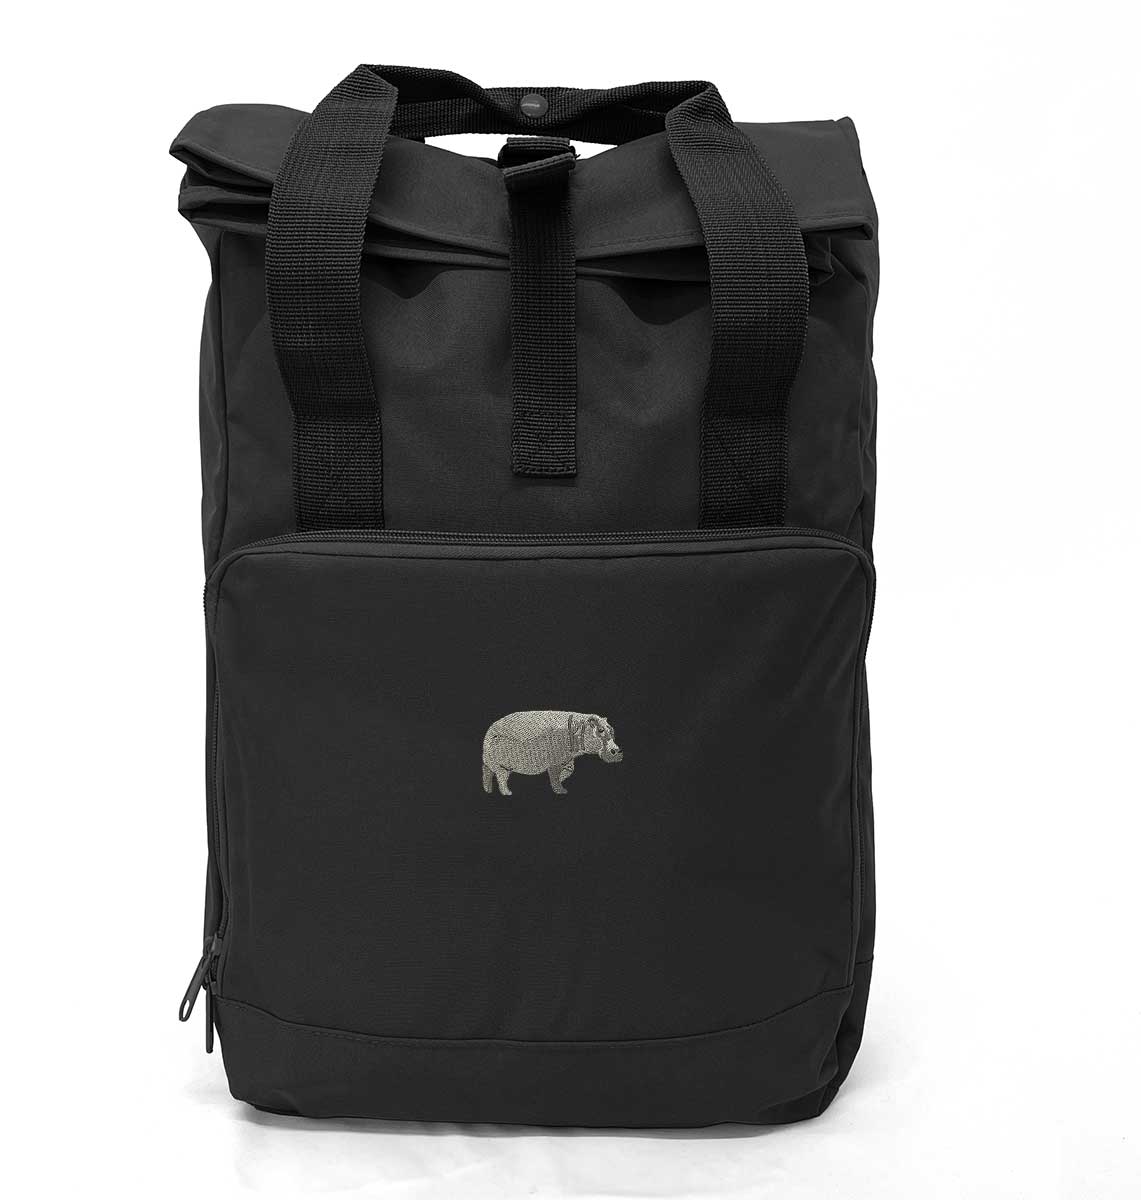 Hippo Large Roll-top Laptop Recycled Backpack - Blue Panda